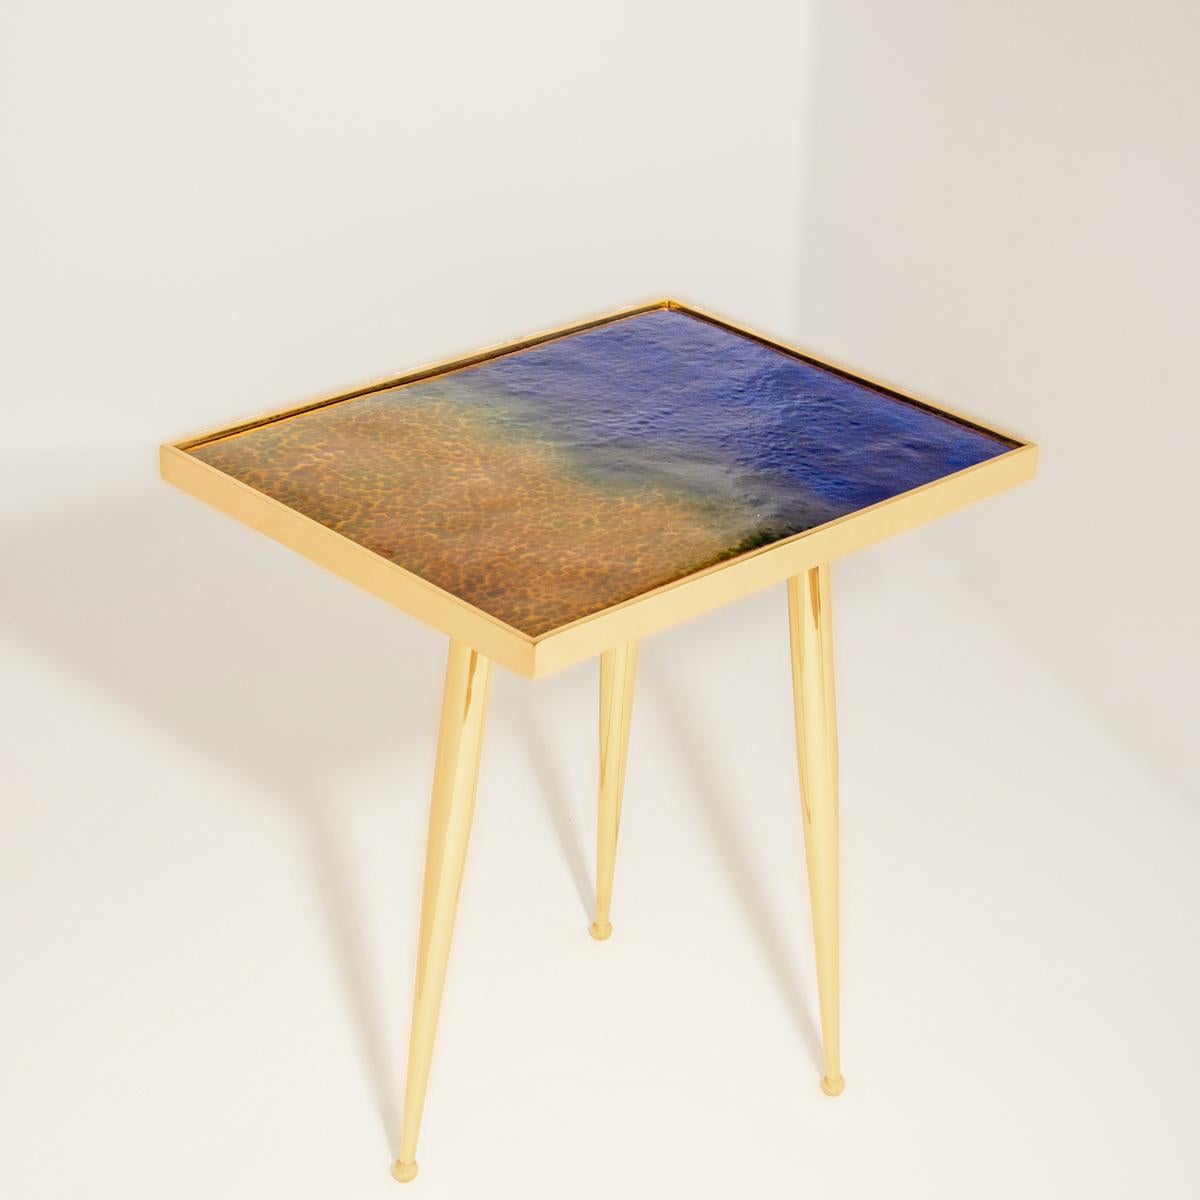 Italian Marea Estate Side Table by form A